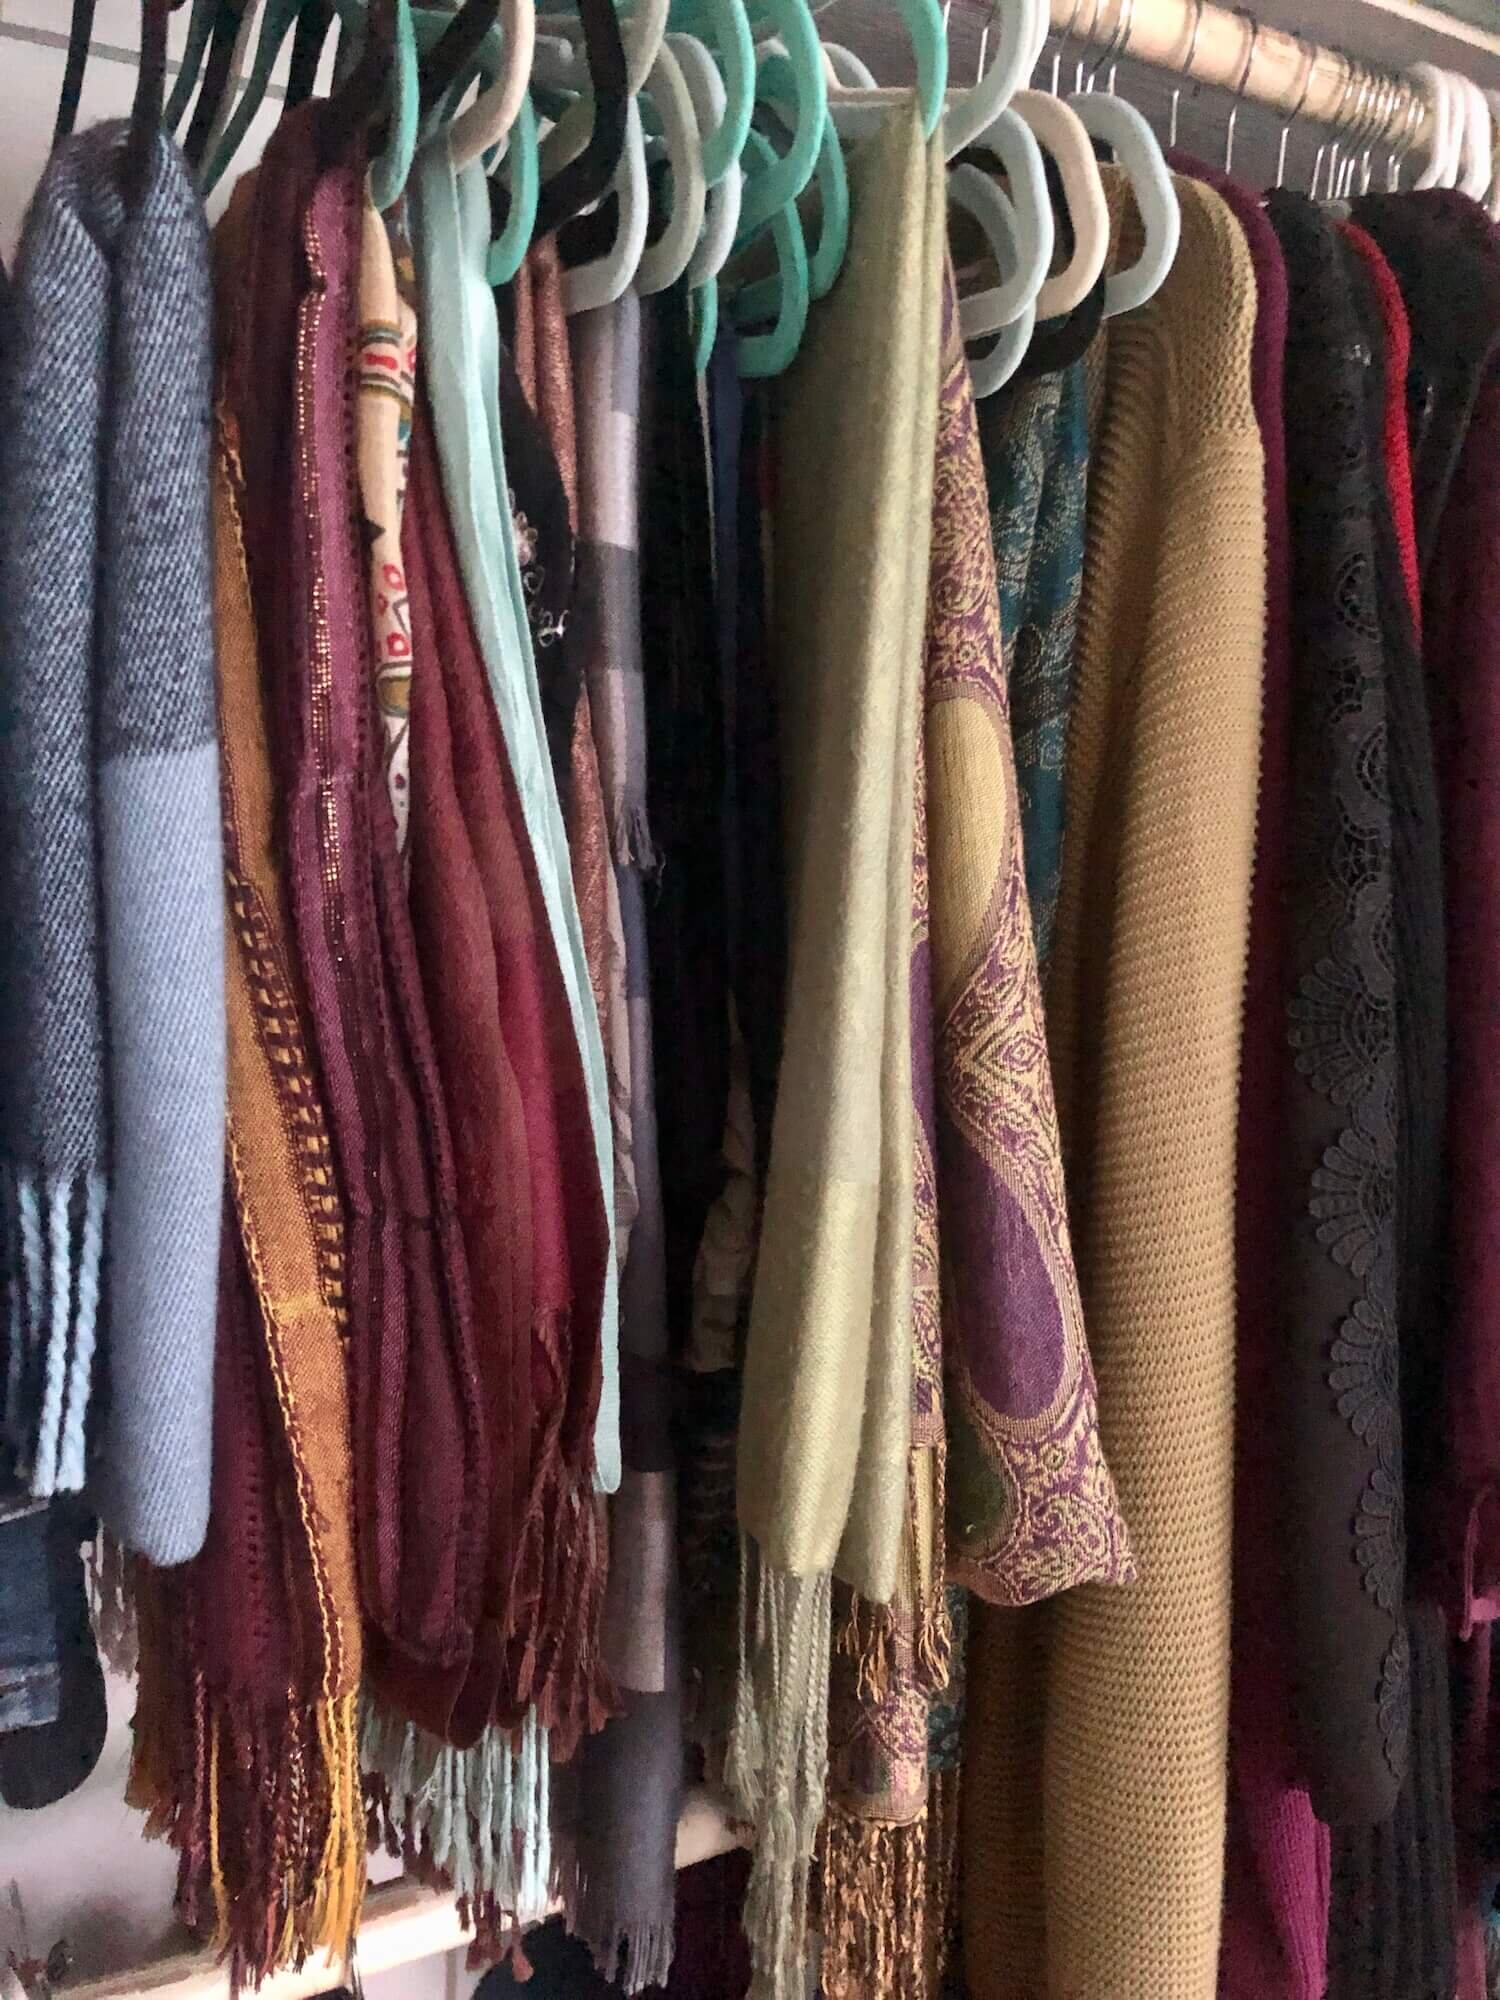 questionable scarf storage